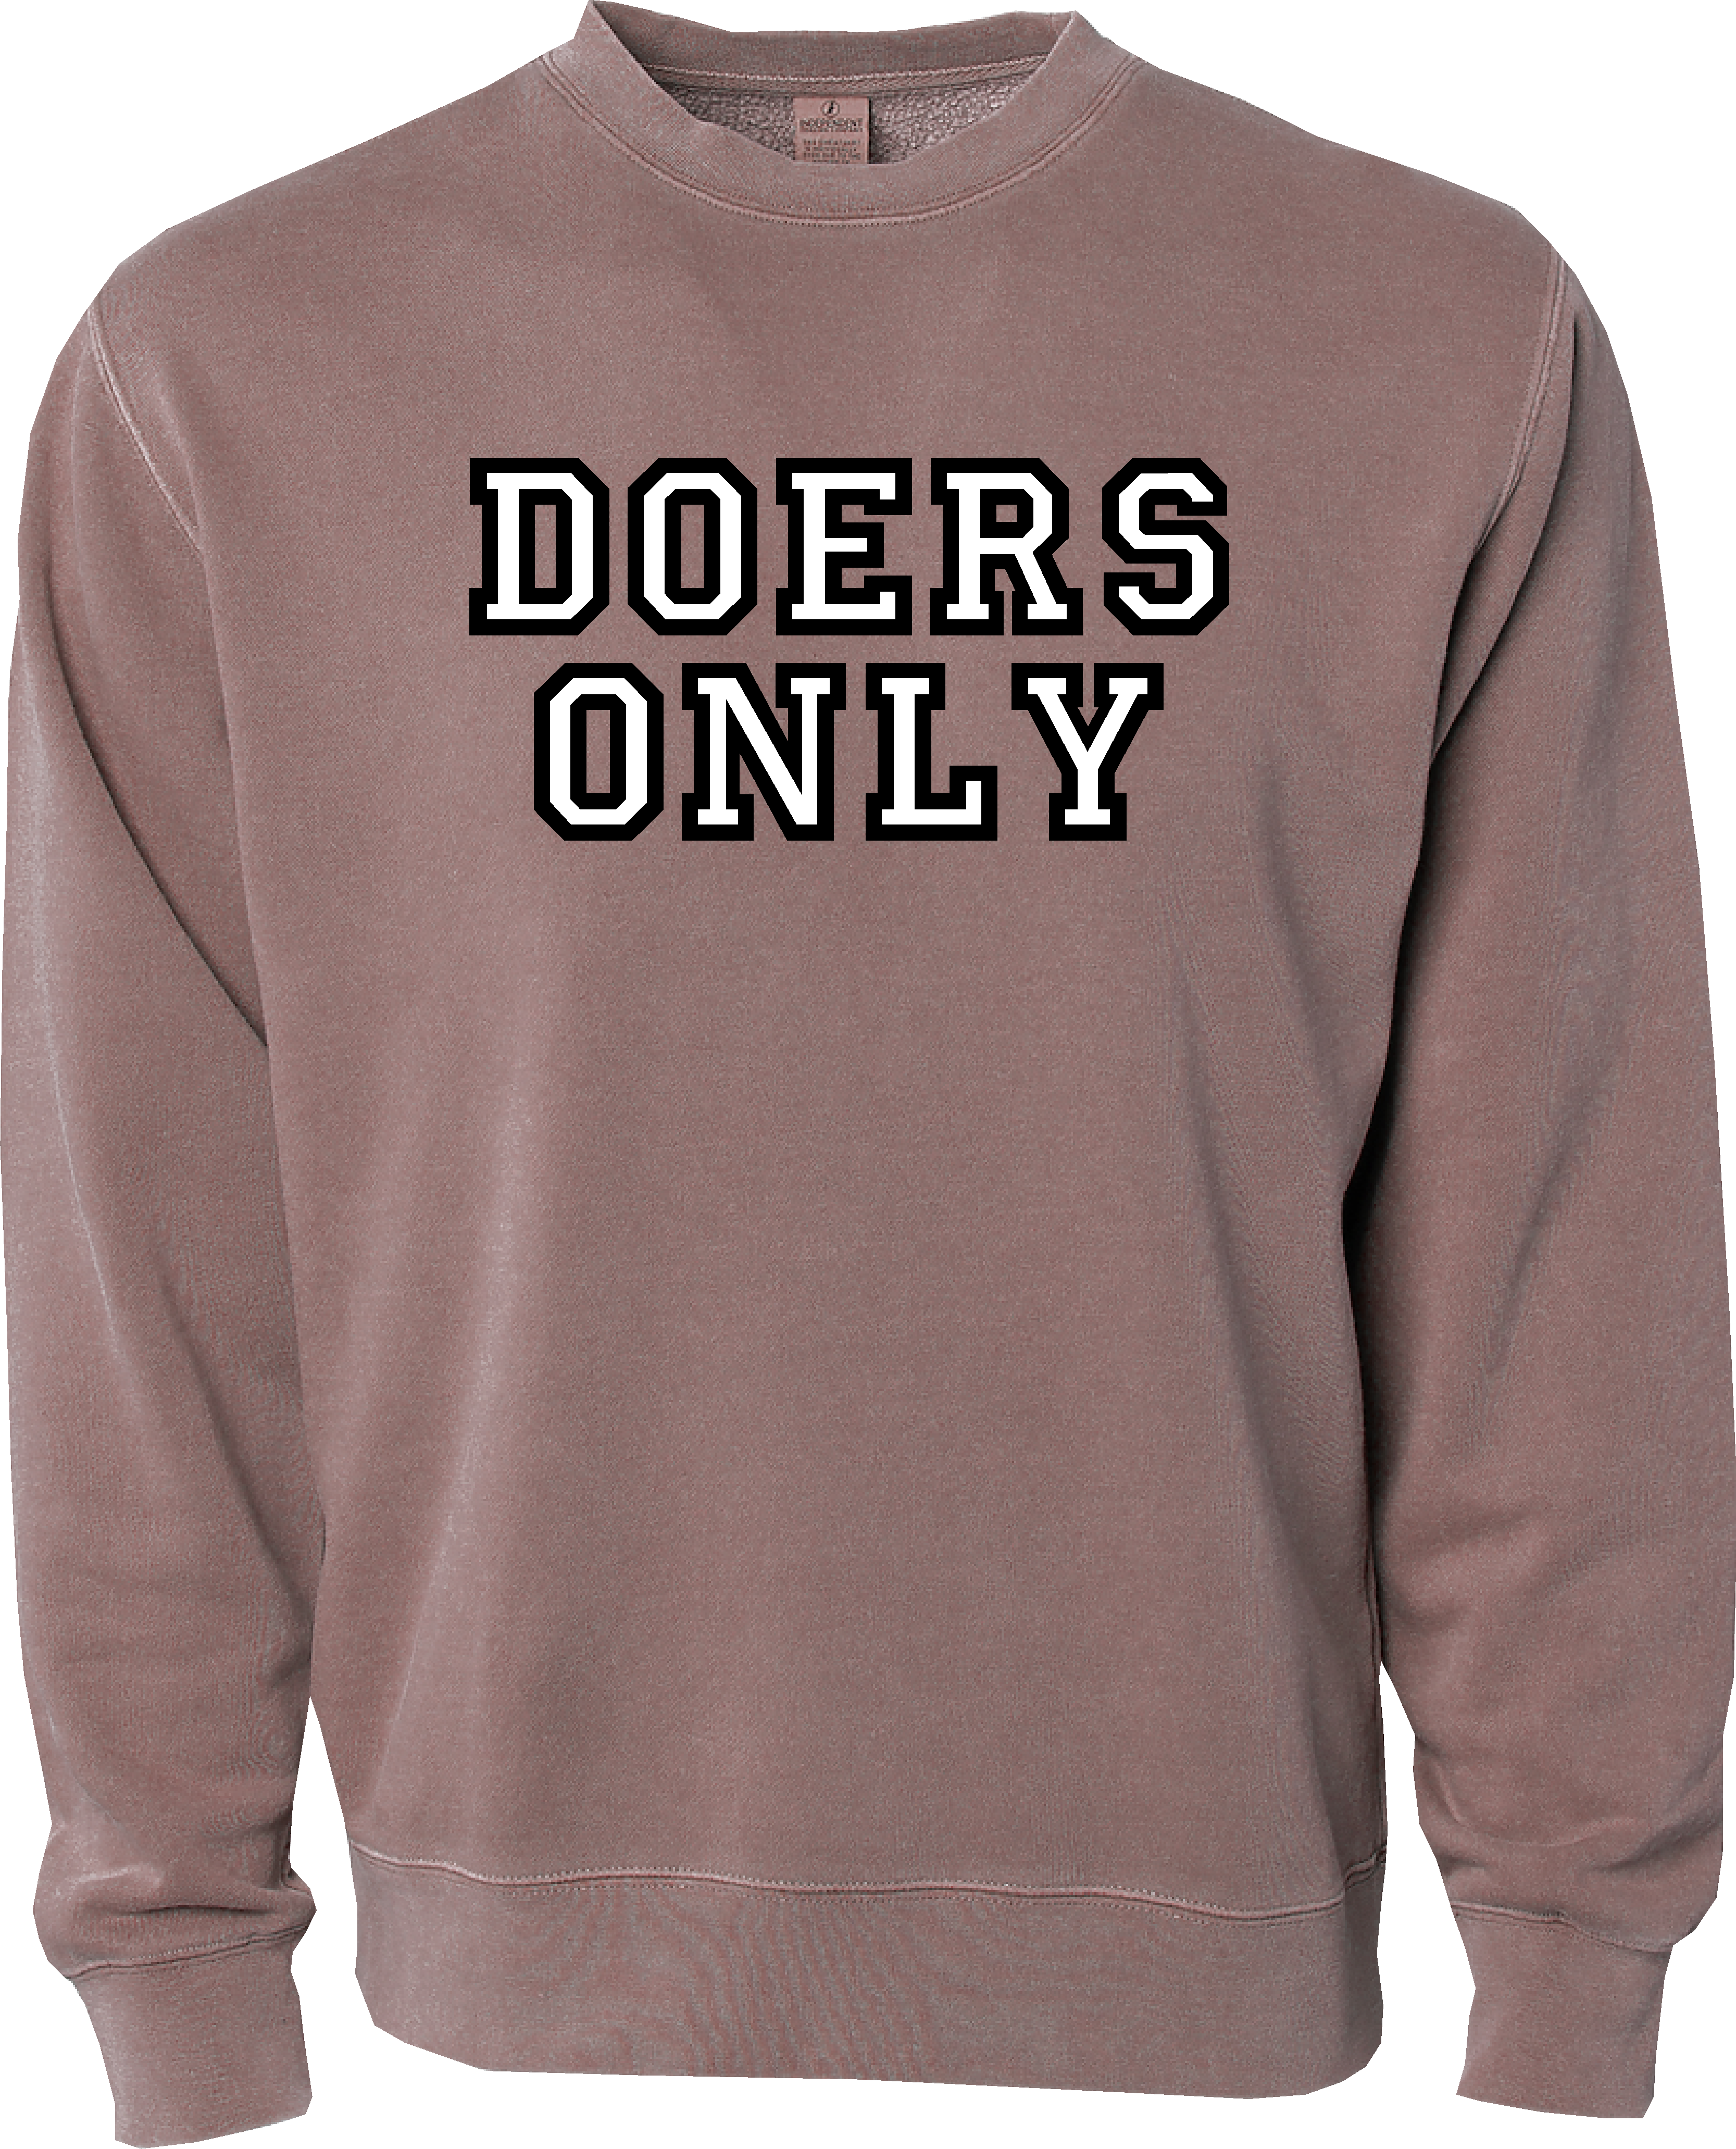 GMBM DOERS ONLY CREW NECK